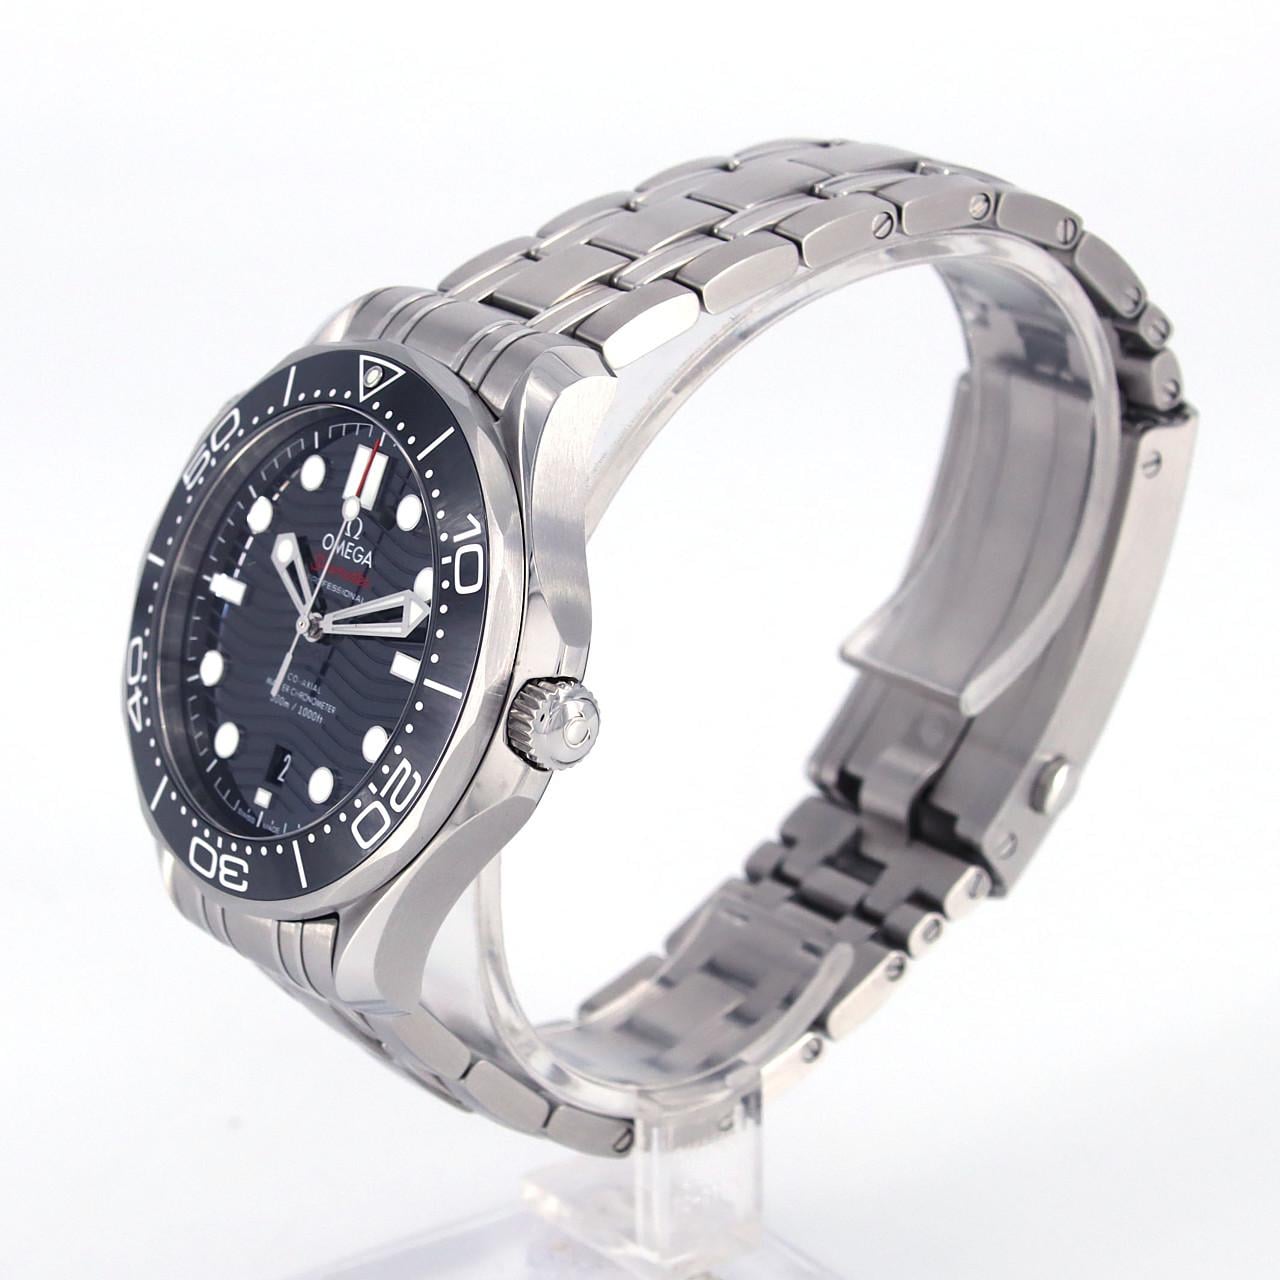 Omega Seamaster Diver 300M 210.30.42.20.01.001 SS Automatic